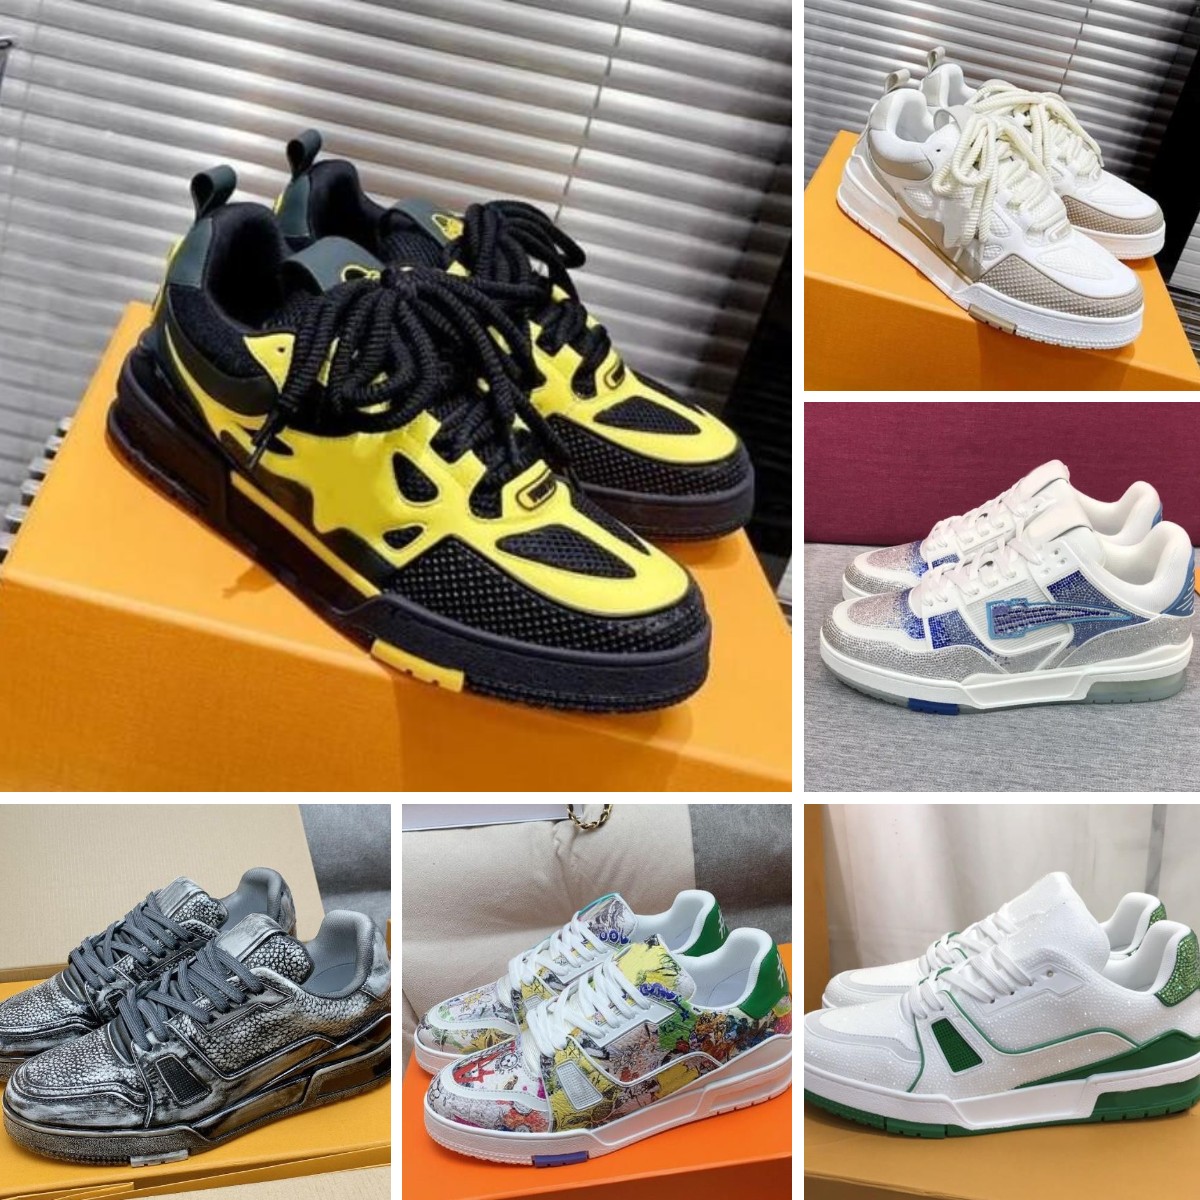 

Trainer Sneaker Designer Shoe Men Women Casual Shoes Embossed Leather Sneakers Lace Up Platform Sole White Pink Black Green Yellow Size 35-46, Colour 7